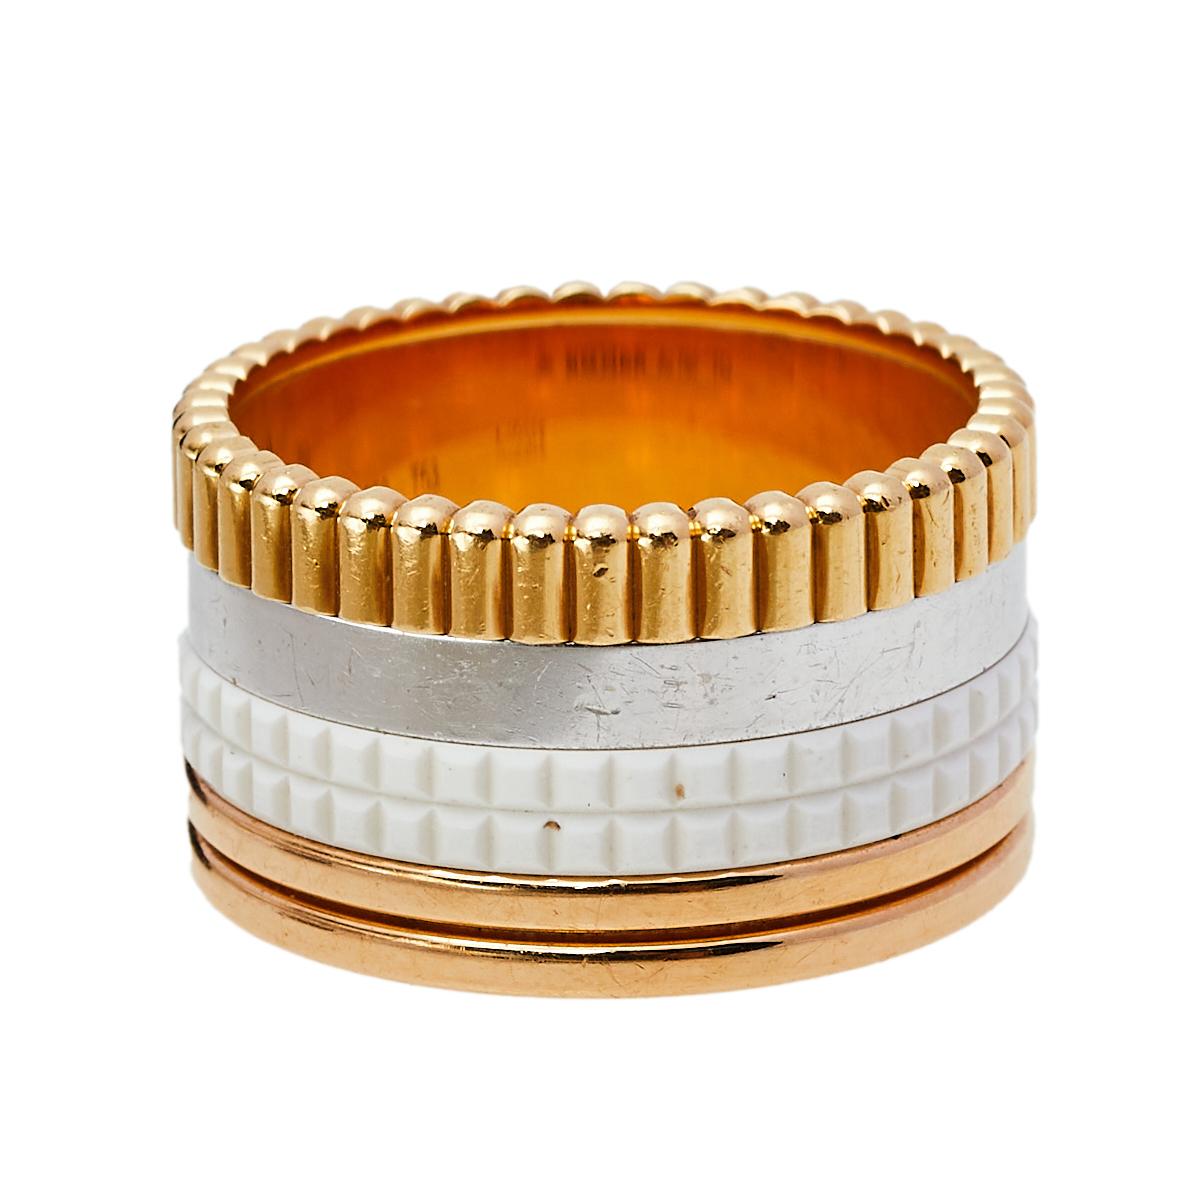 Boucheron's Quatre collection beautifully presents the spirit of the brand, exemplifying craftsmanship, and an intricate play of textures and gold. The very collection blesses you with this ring, arranged preciously in 18K three-tone gold and white